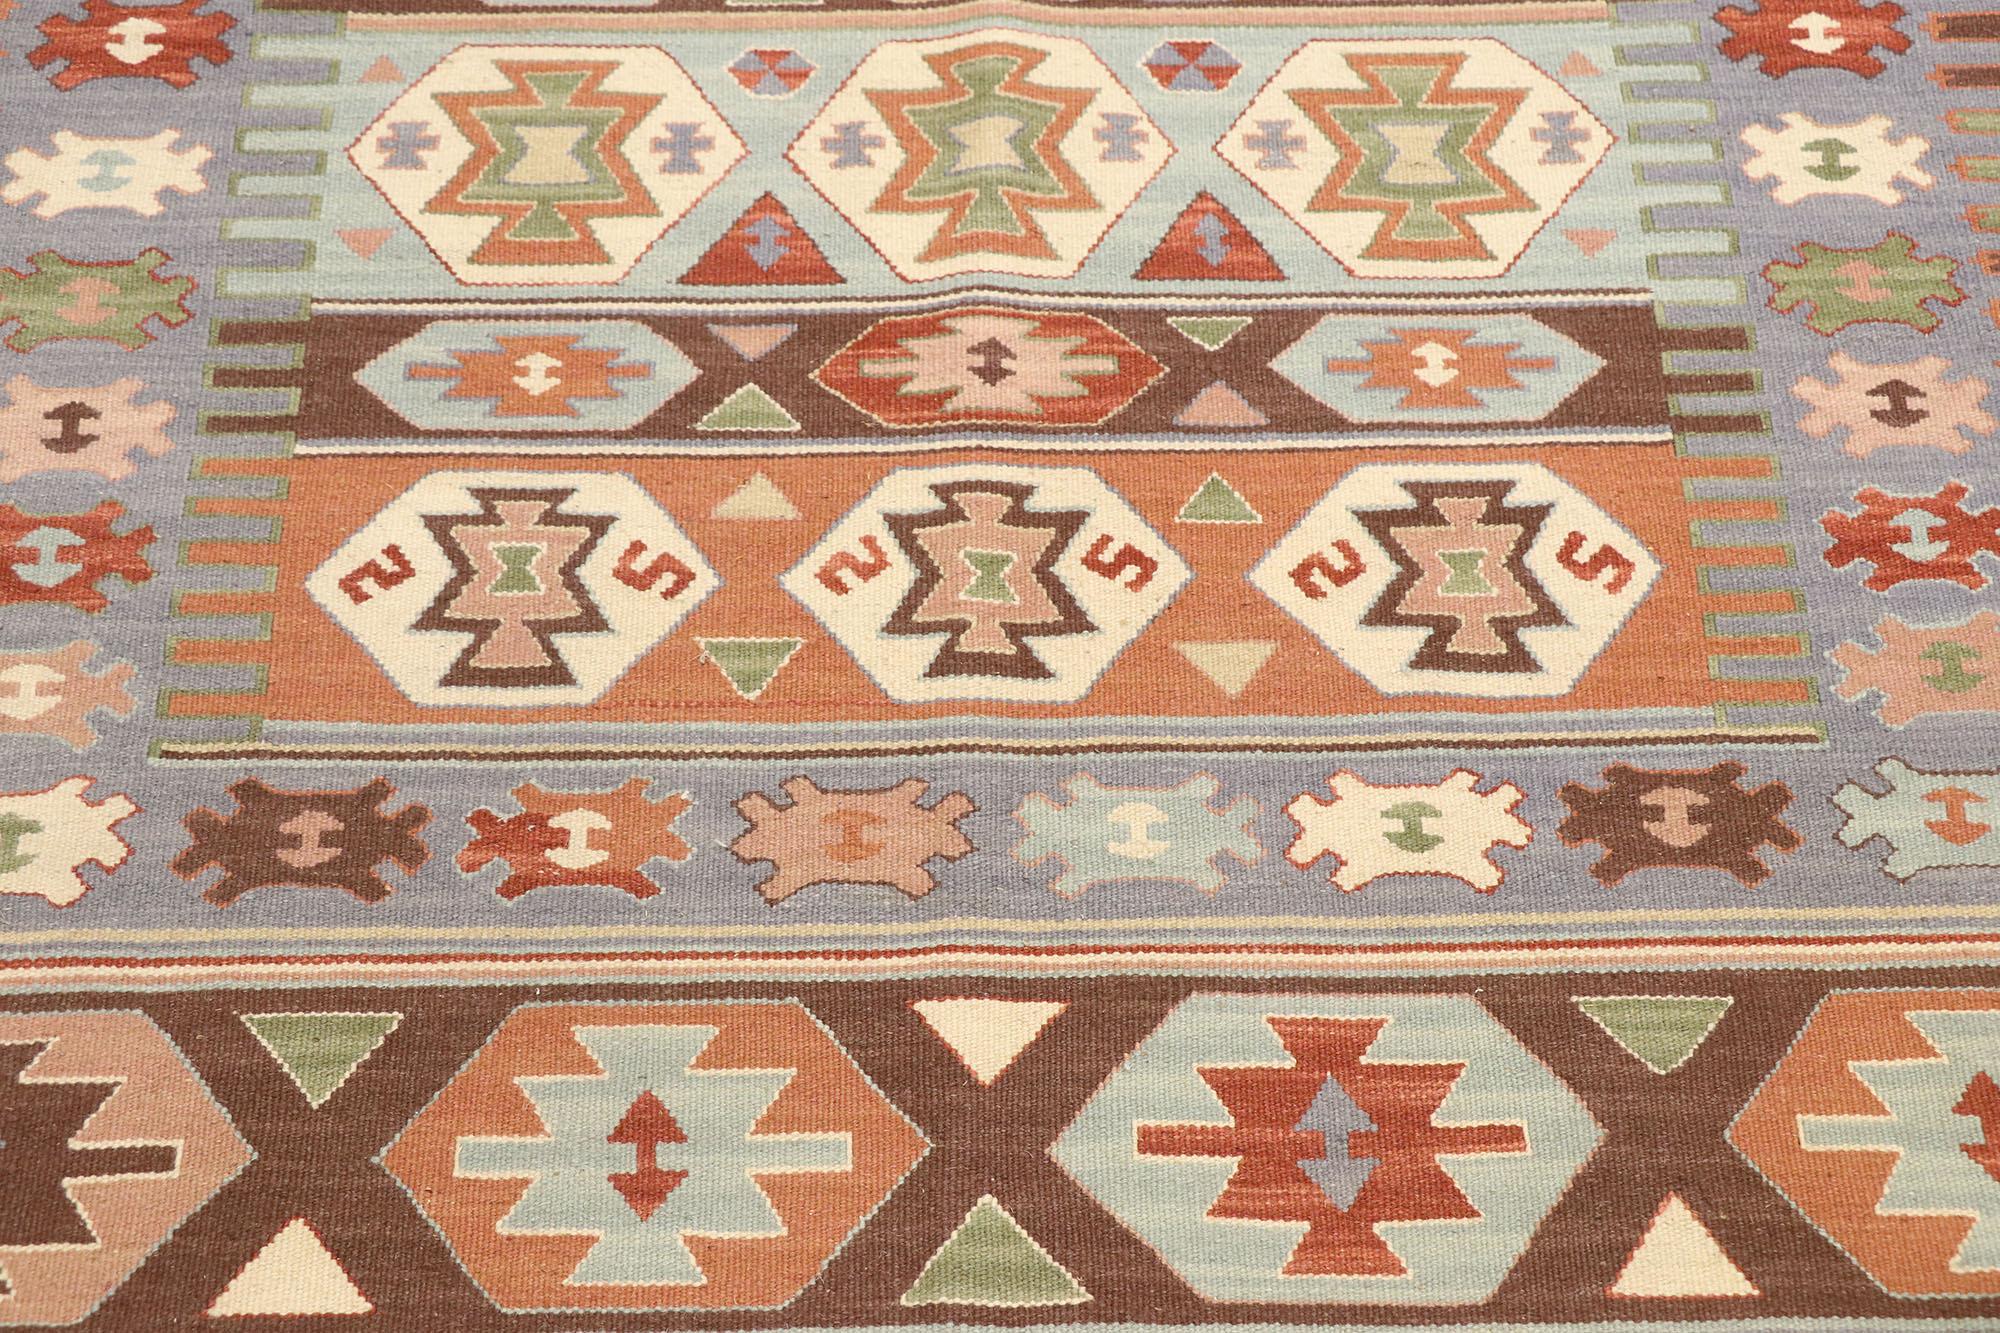 Vintage Persian Shiraz Kilim Rug with Bohemian Tribal Style In Good Condition For Sale In Dallas, TX